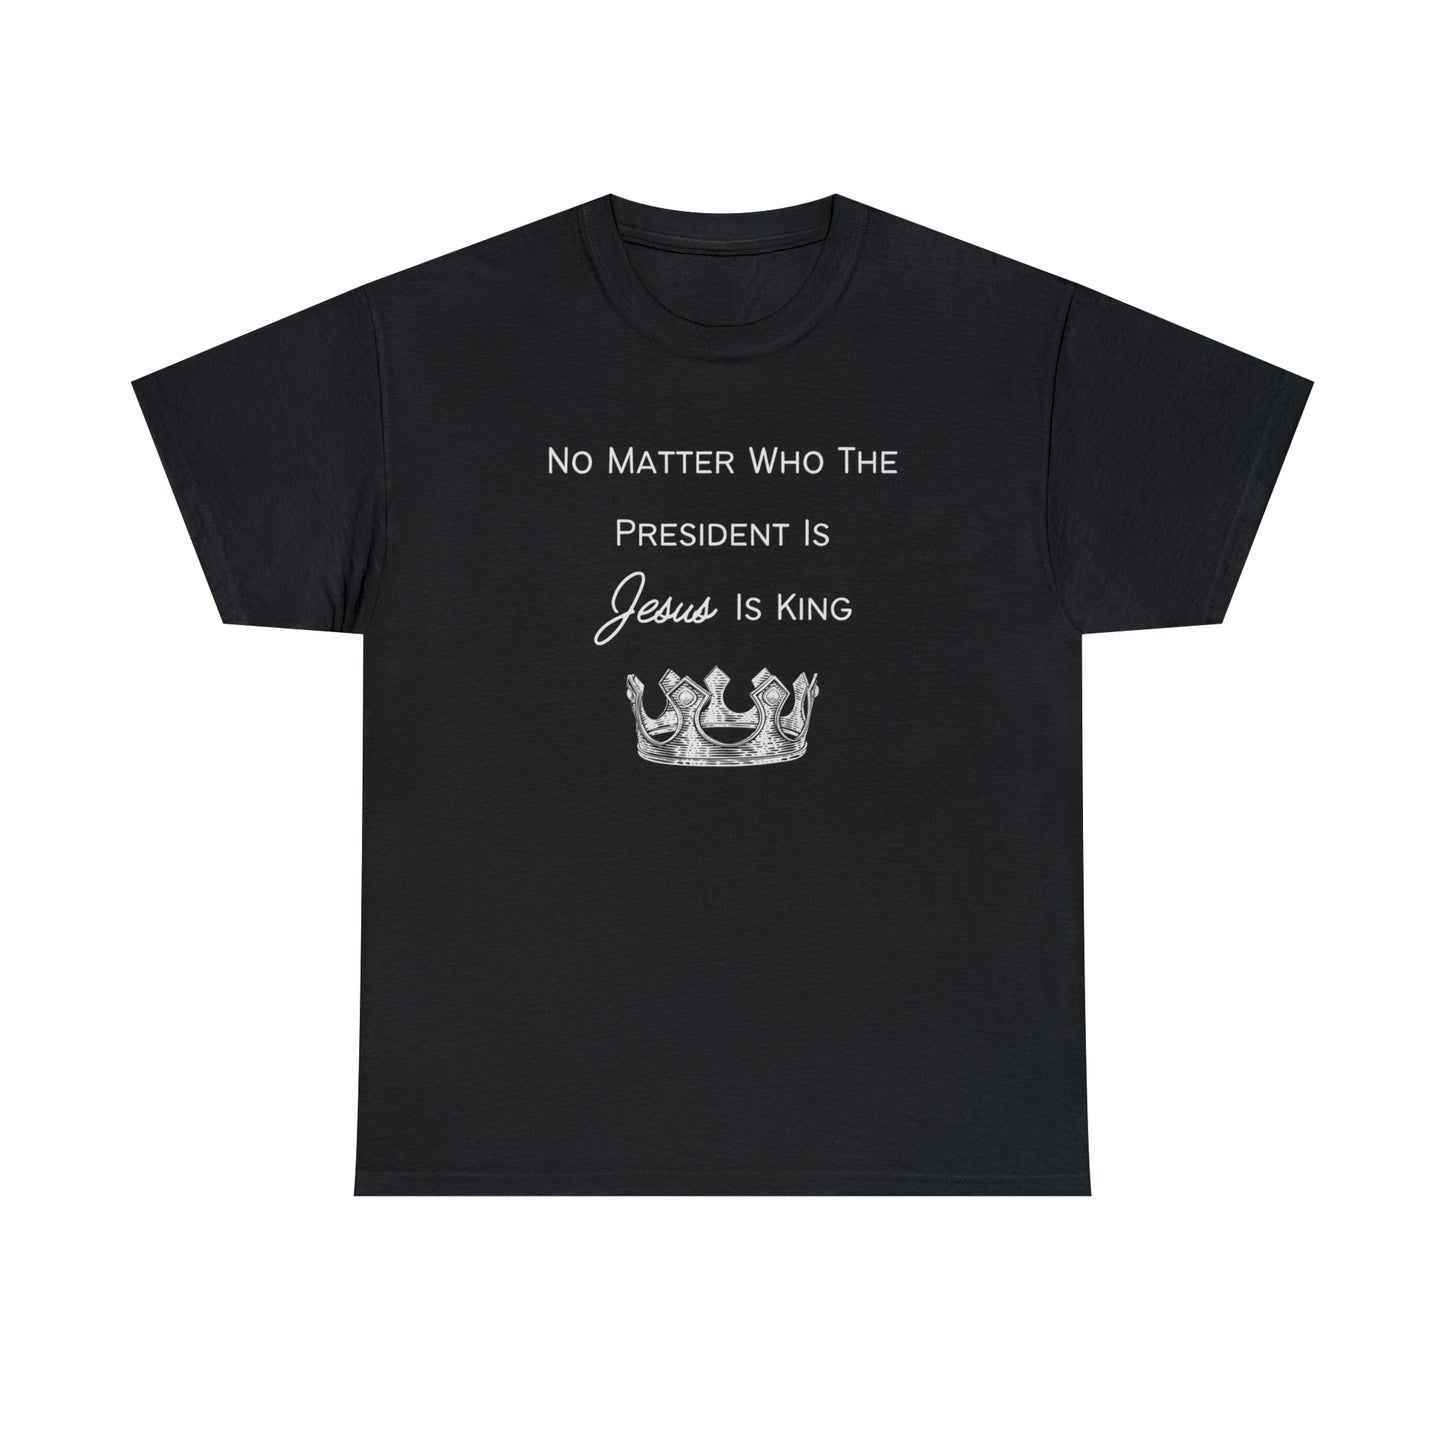 Vintage-inspired "Jesus Is King" faith t-shirt